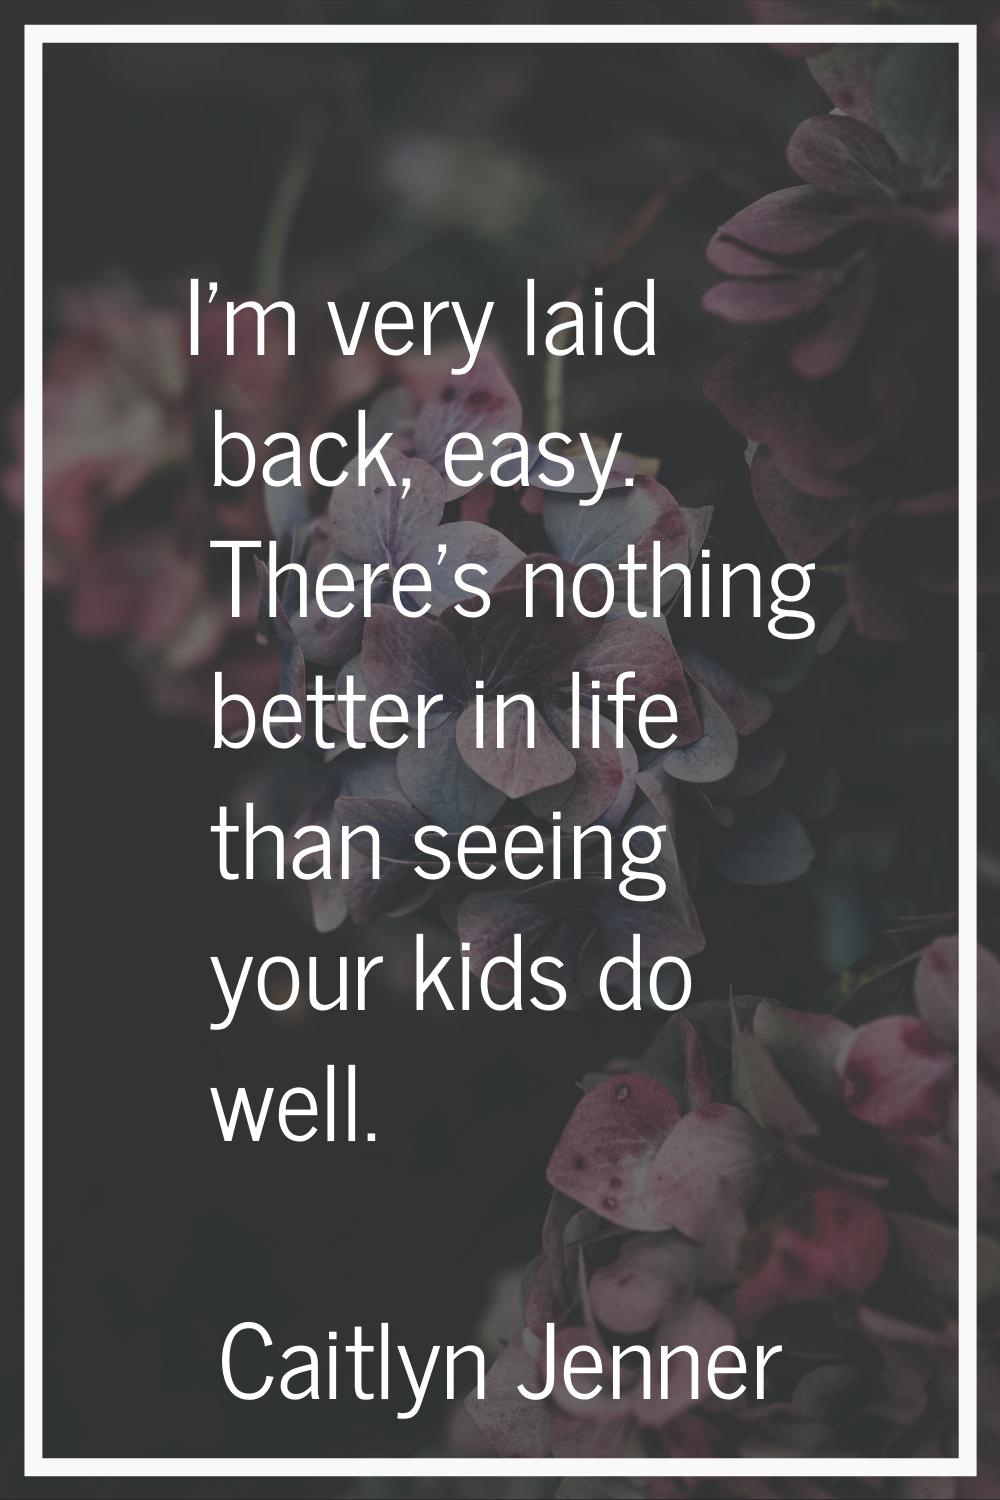 I'm very laid back, easy. There's nothing better in life than seeing your kids do well.